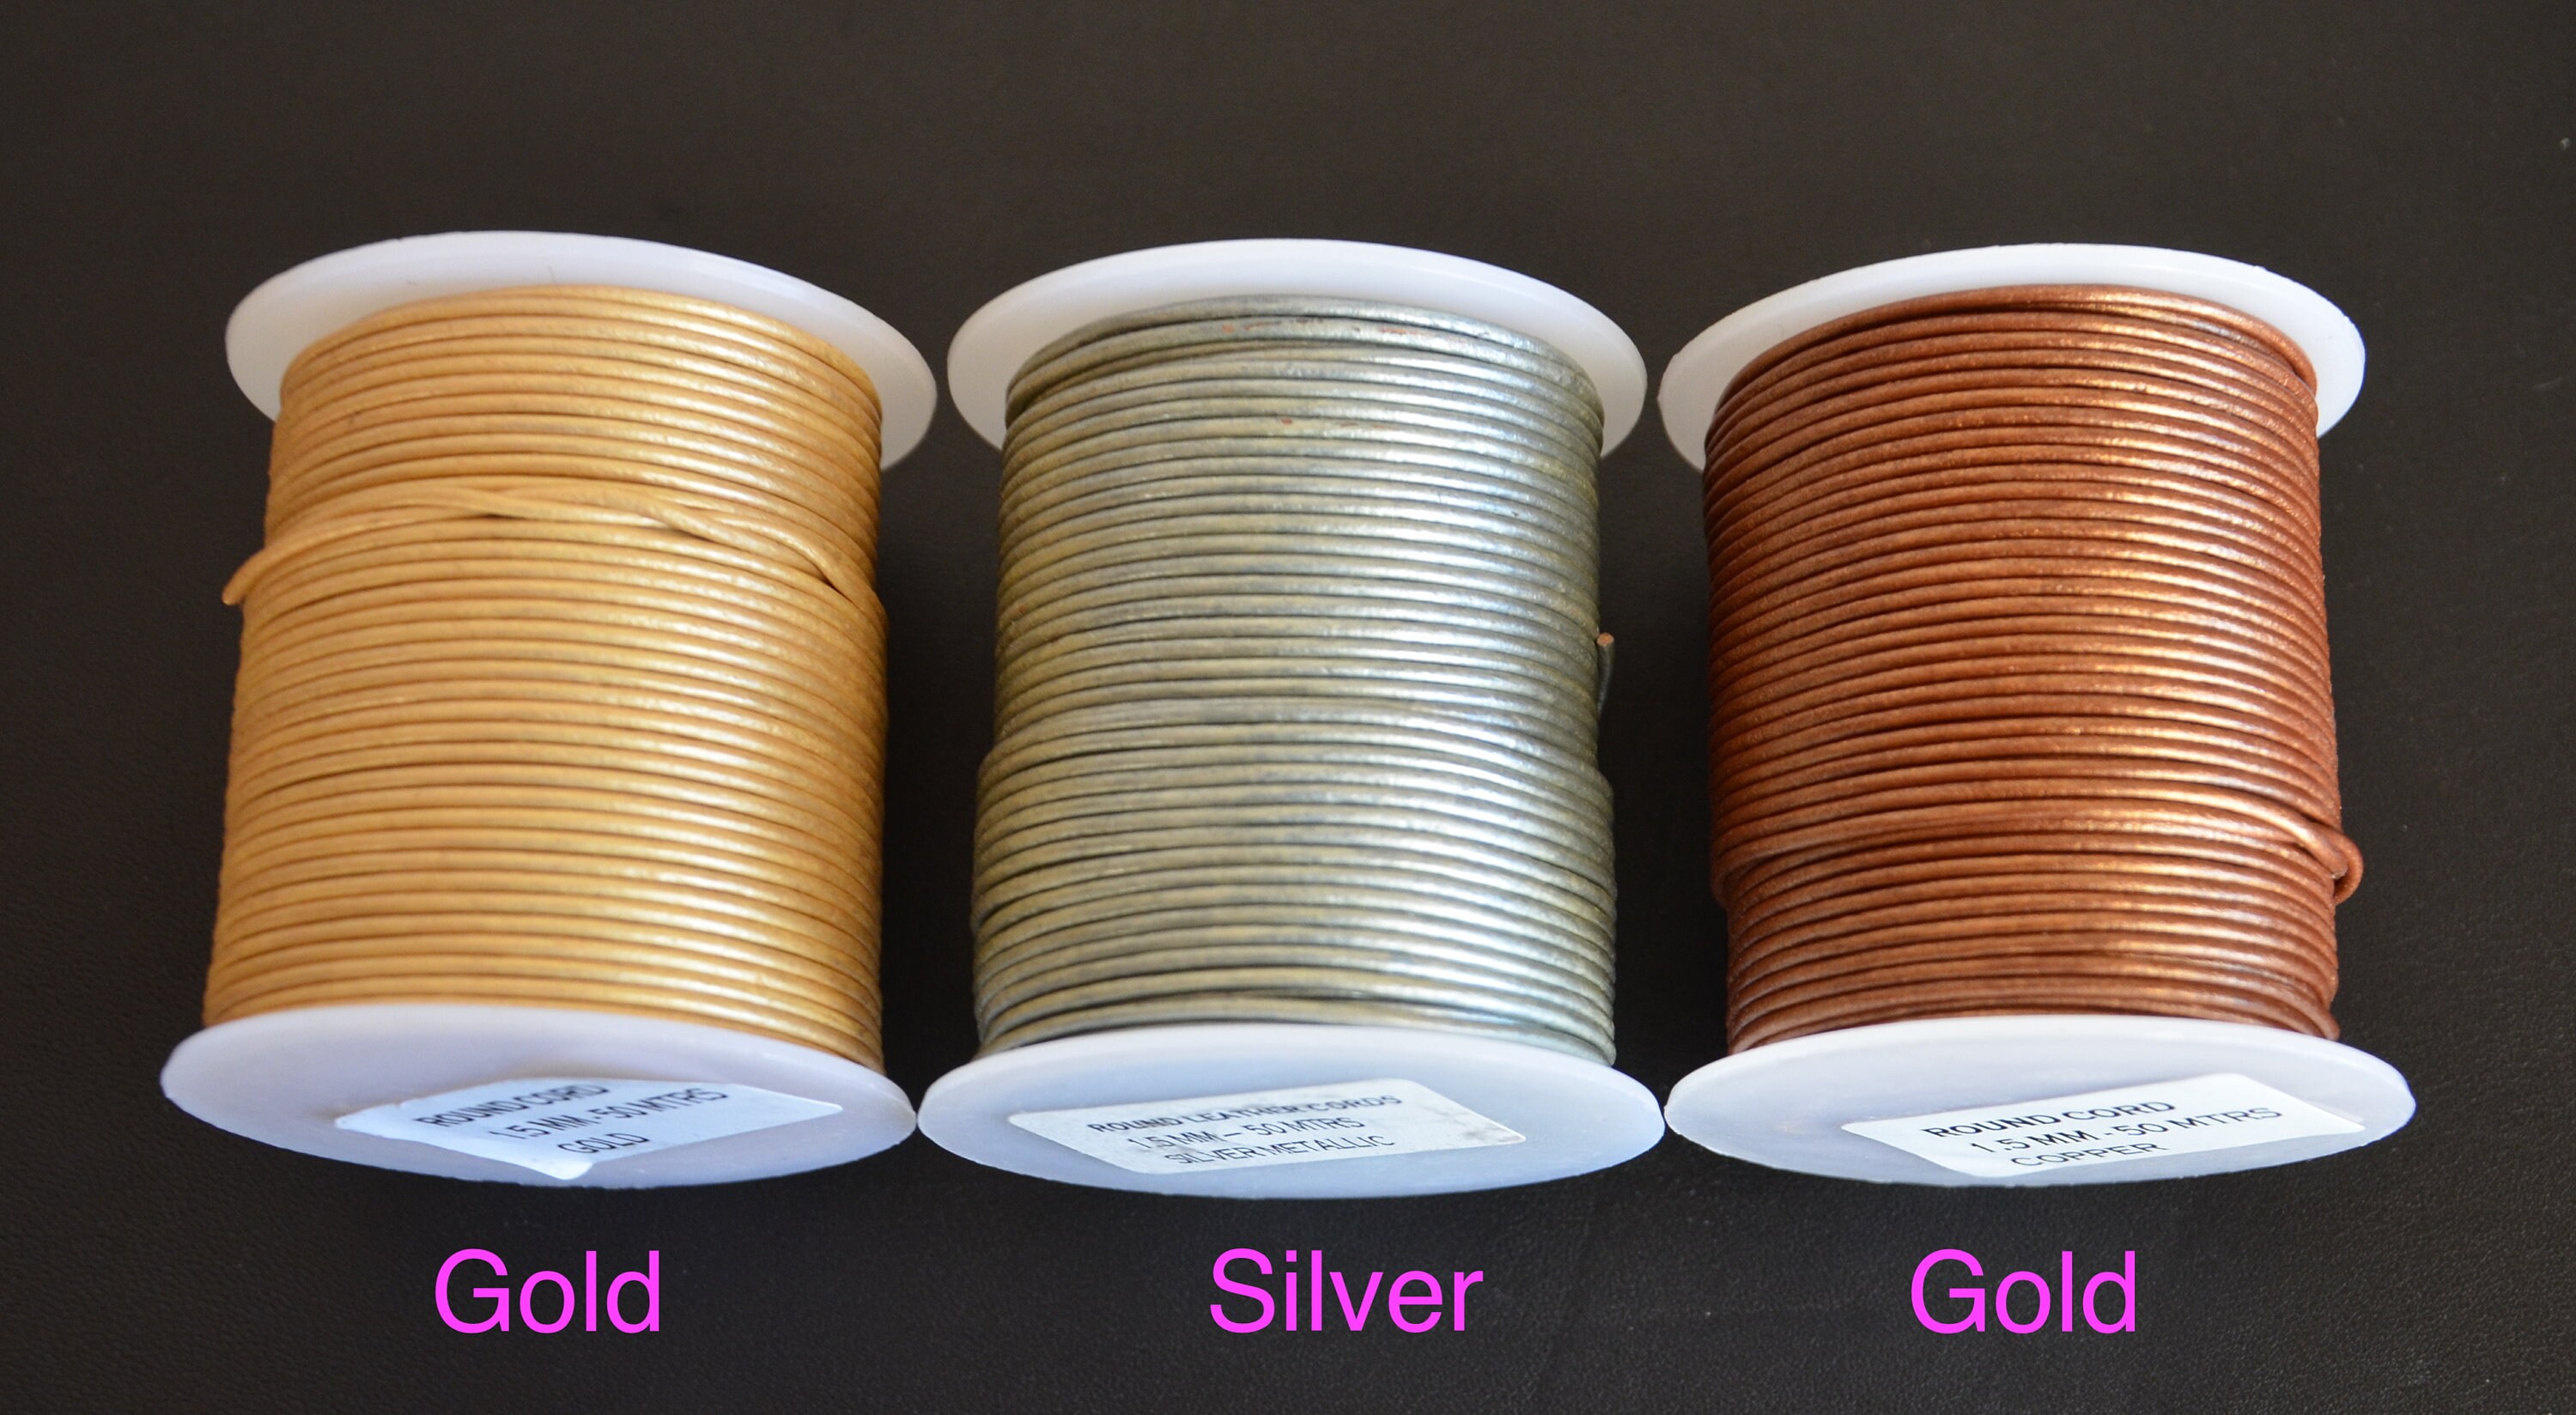 Round Leather Cord, Jewelry Supply